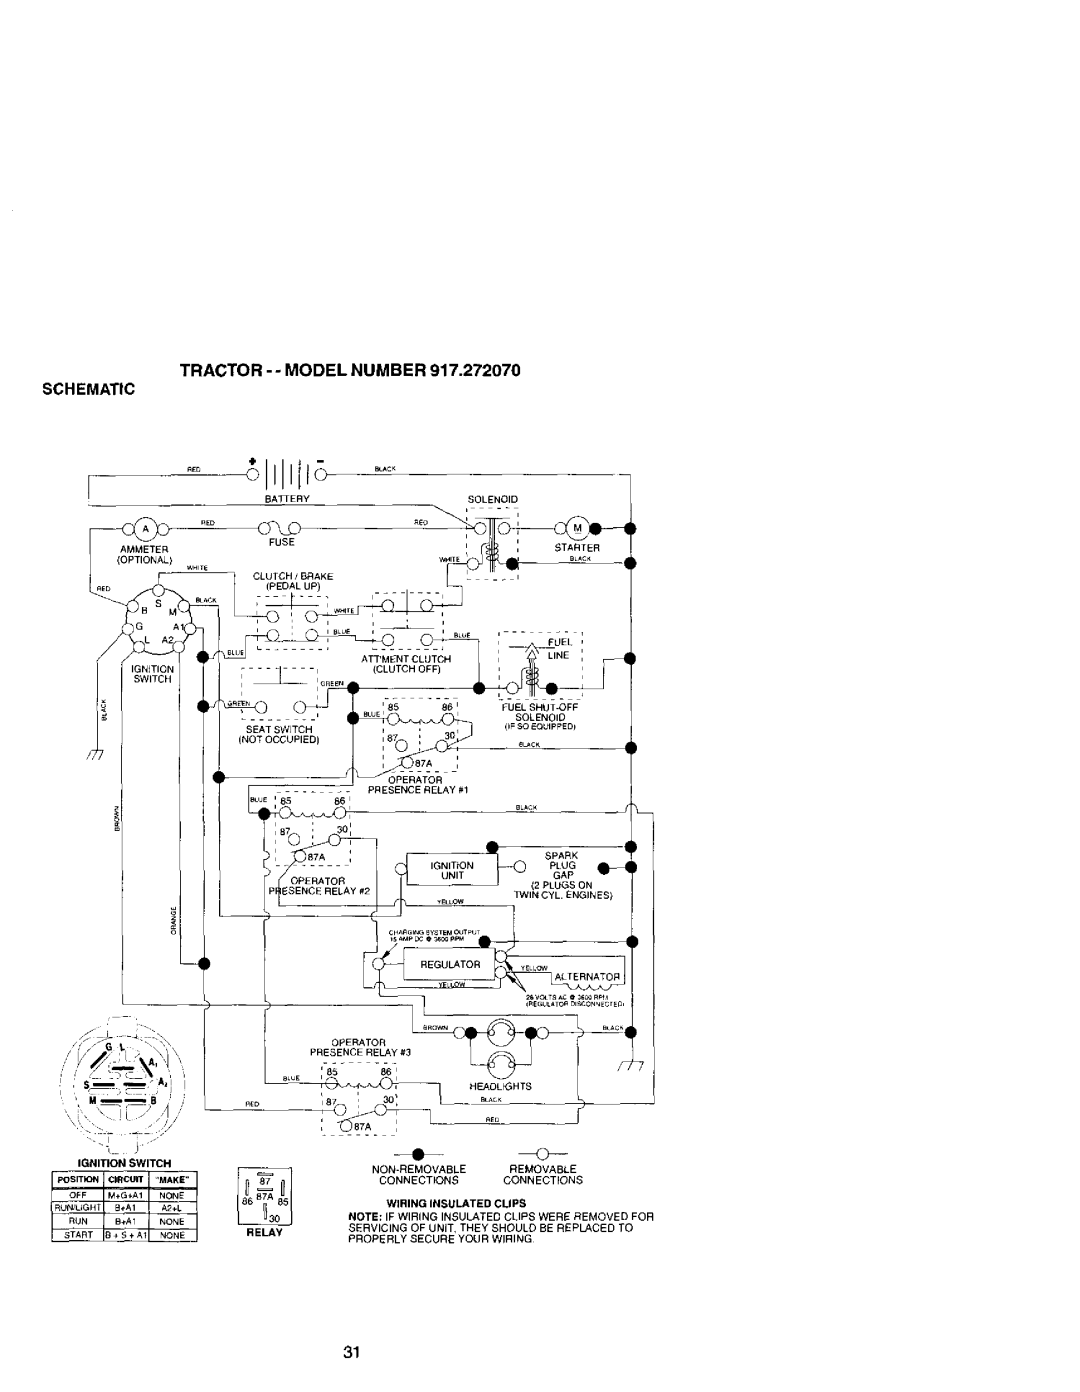 Craftsman 917.27207 owner manual Tractor - - Model Number, Schematic 